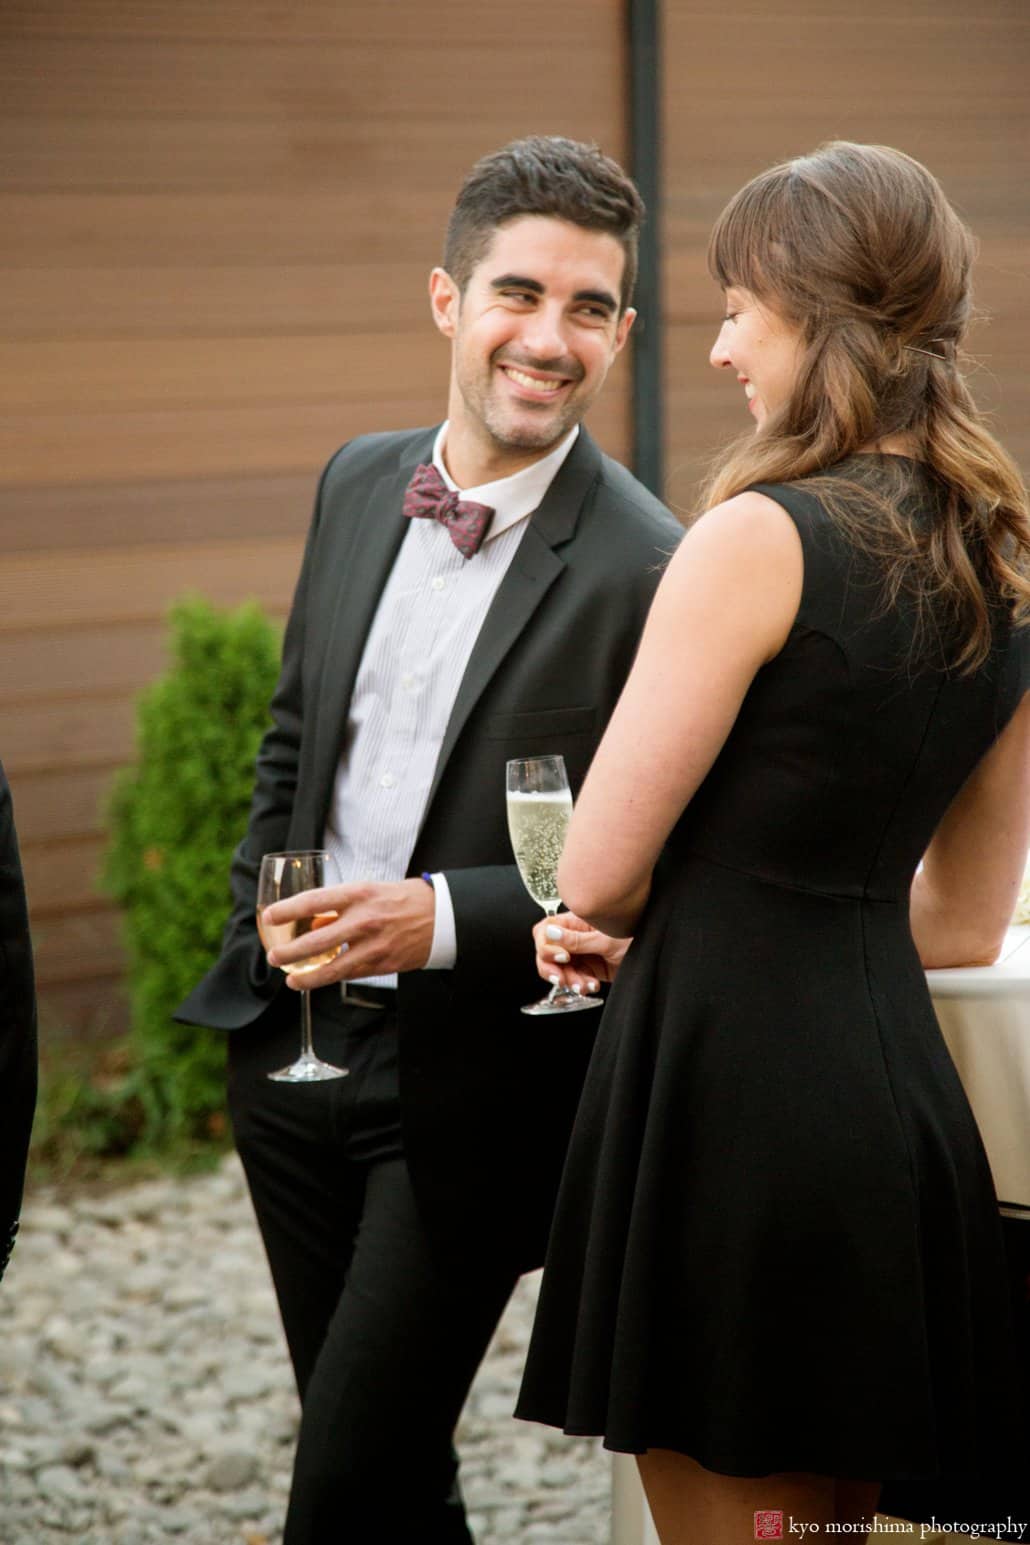 Guests flirt with each other during Green Building wedding cocktail hour, photographed by Kyo Morishima